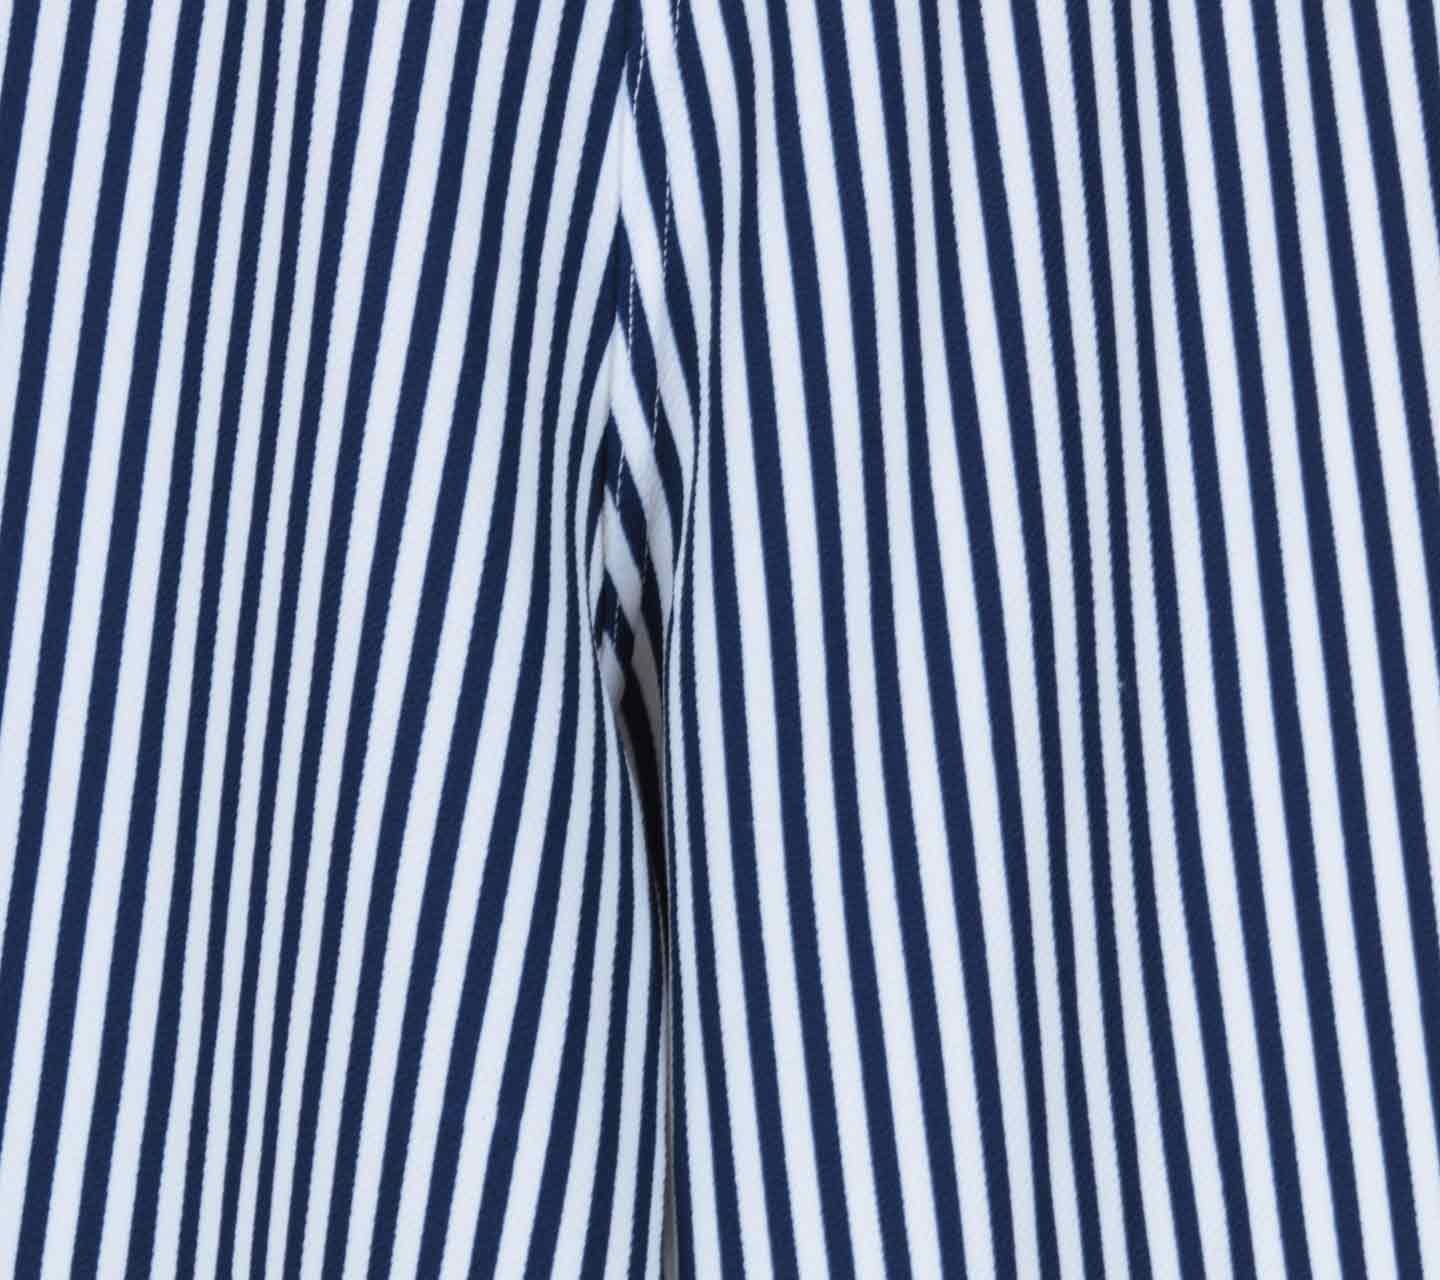 H&M Blue And White Stripes Pants